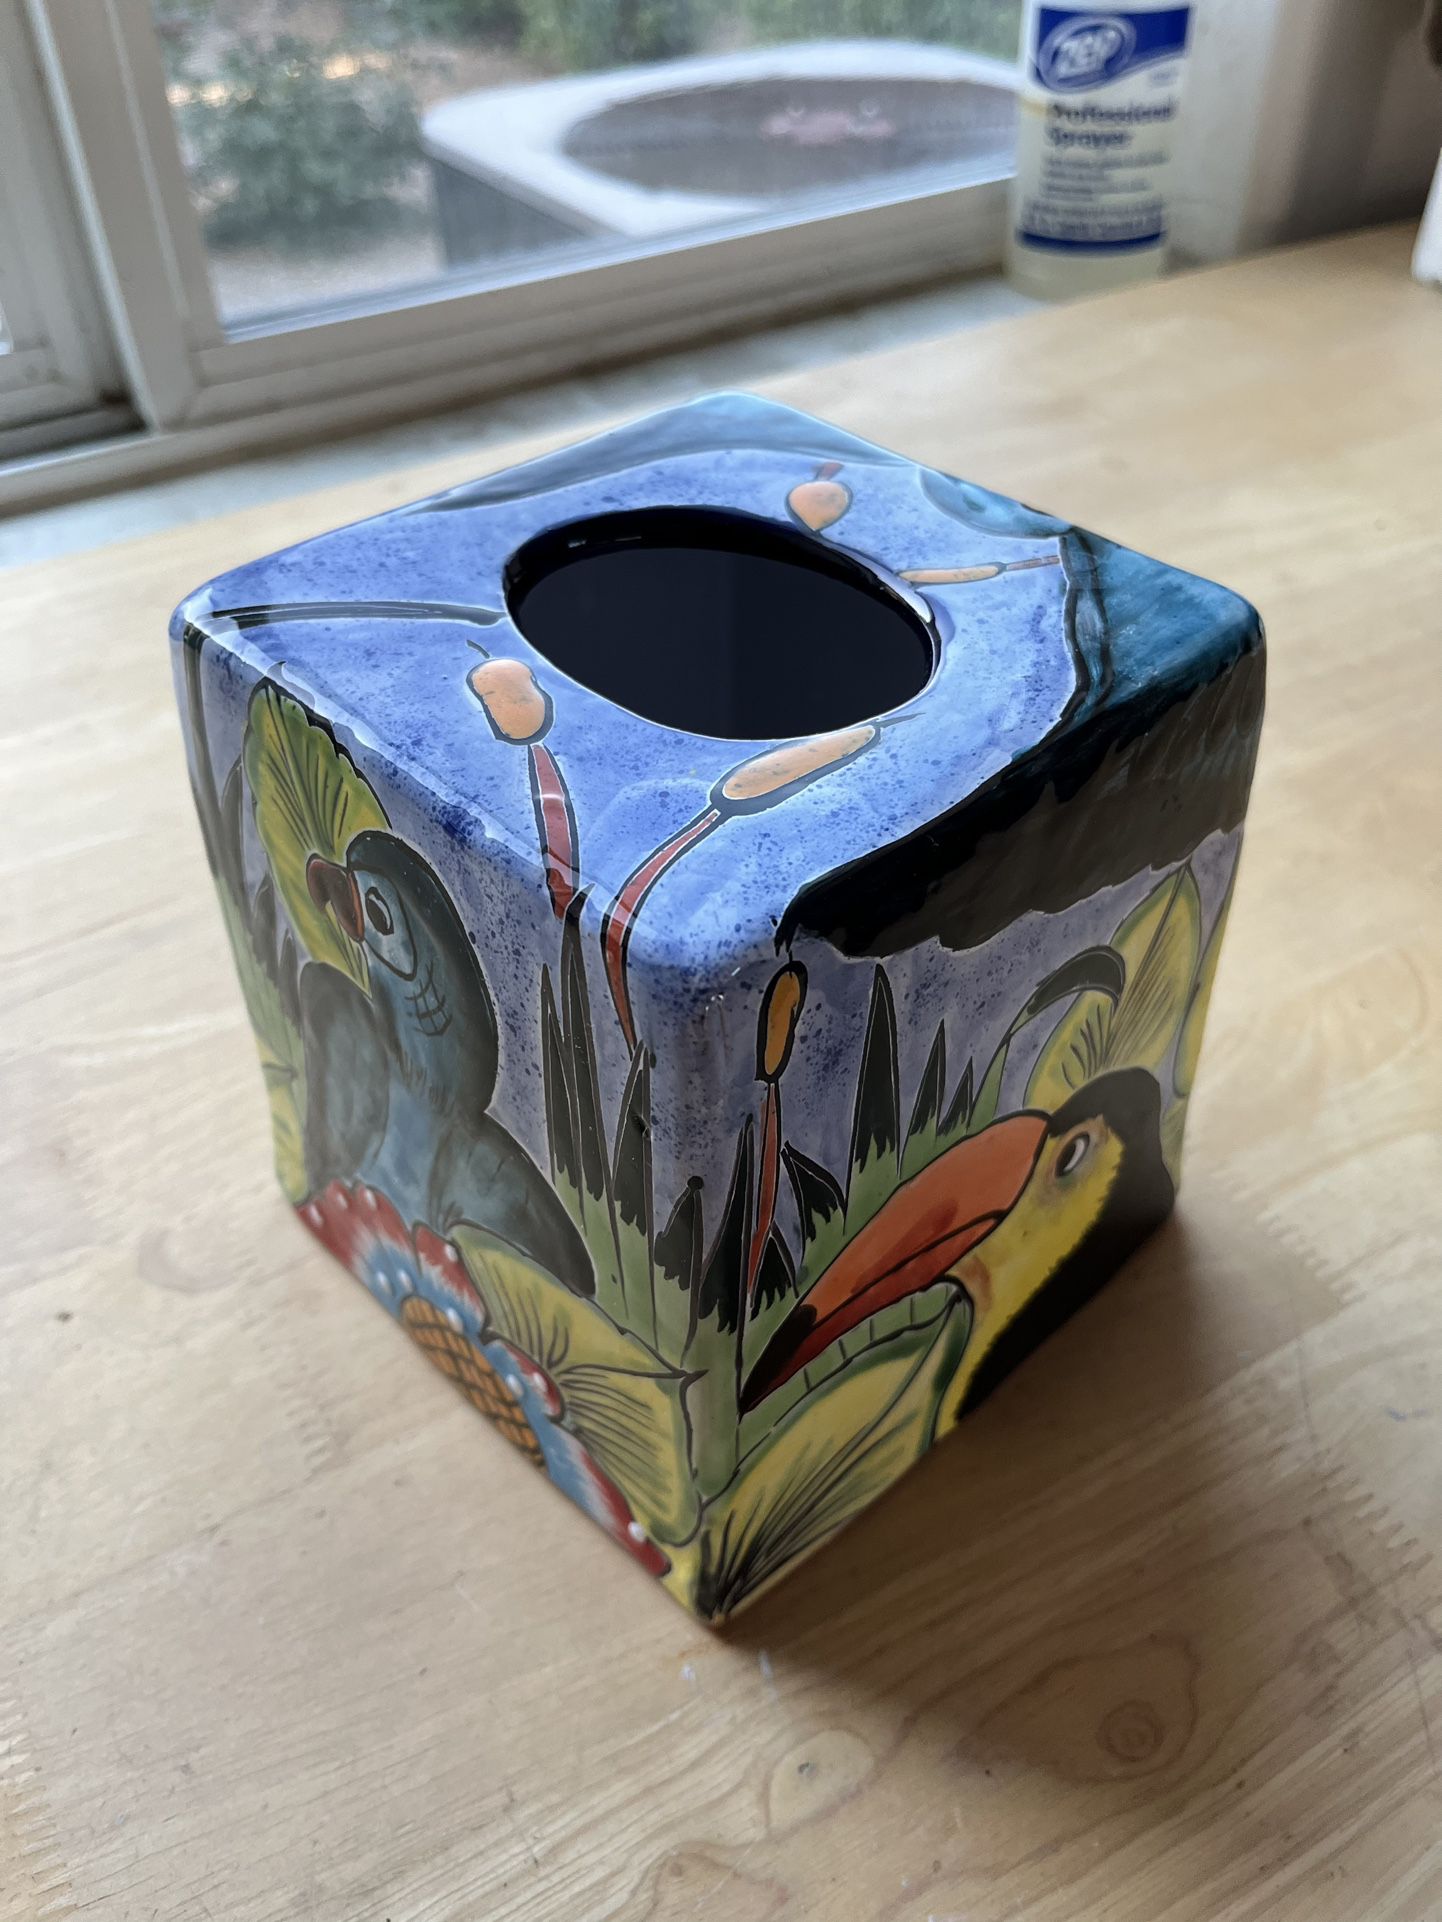 Hand Painted Made In Mexico Facial Tissue Holder